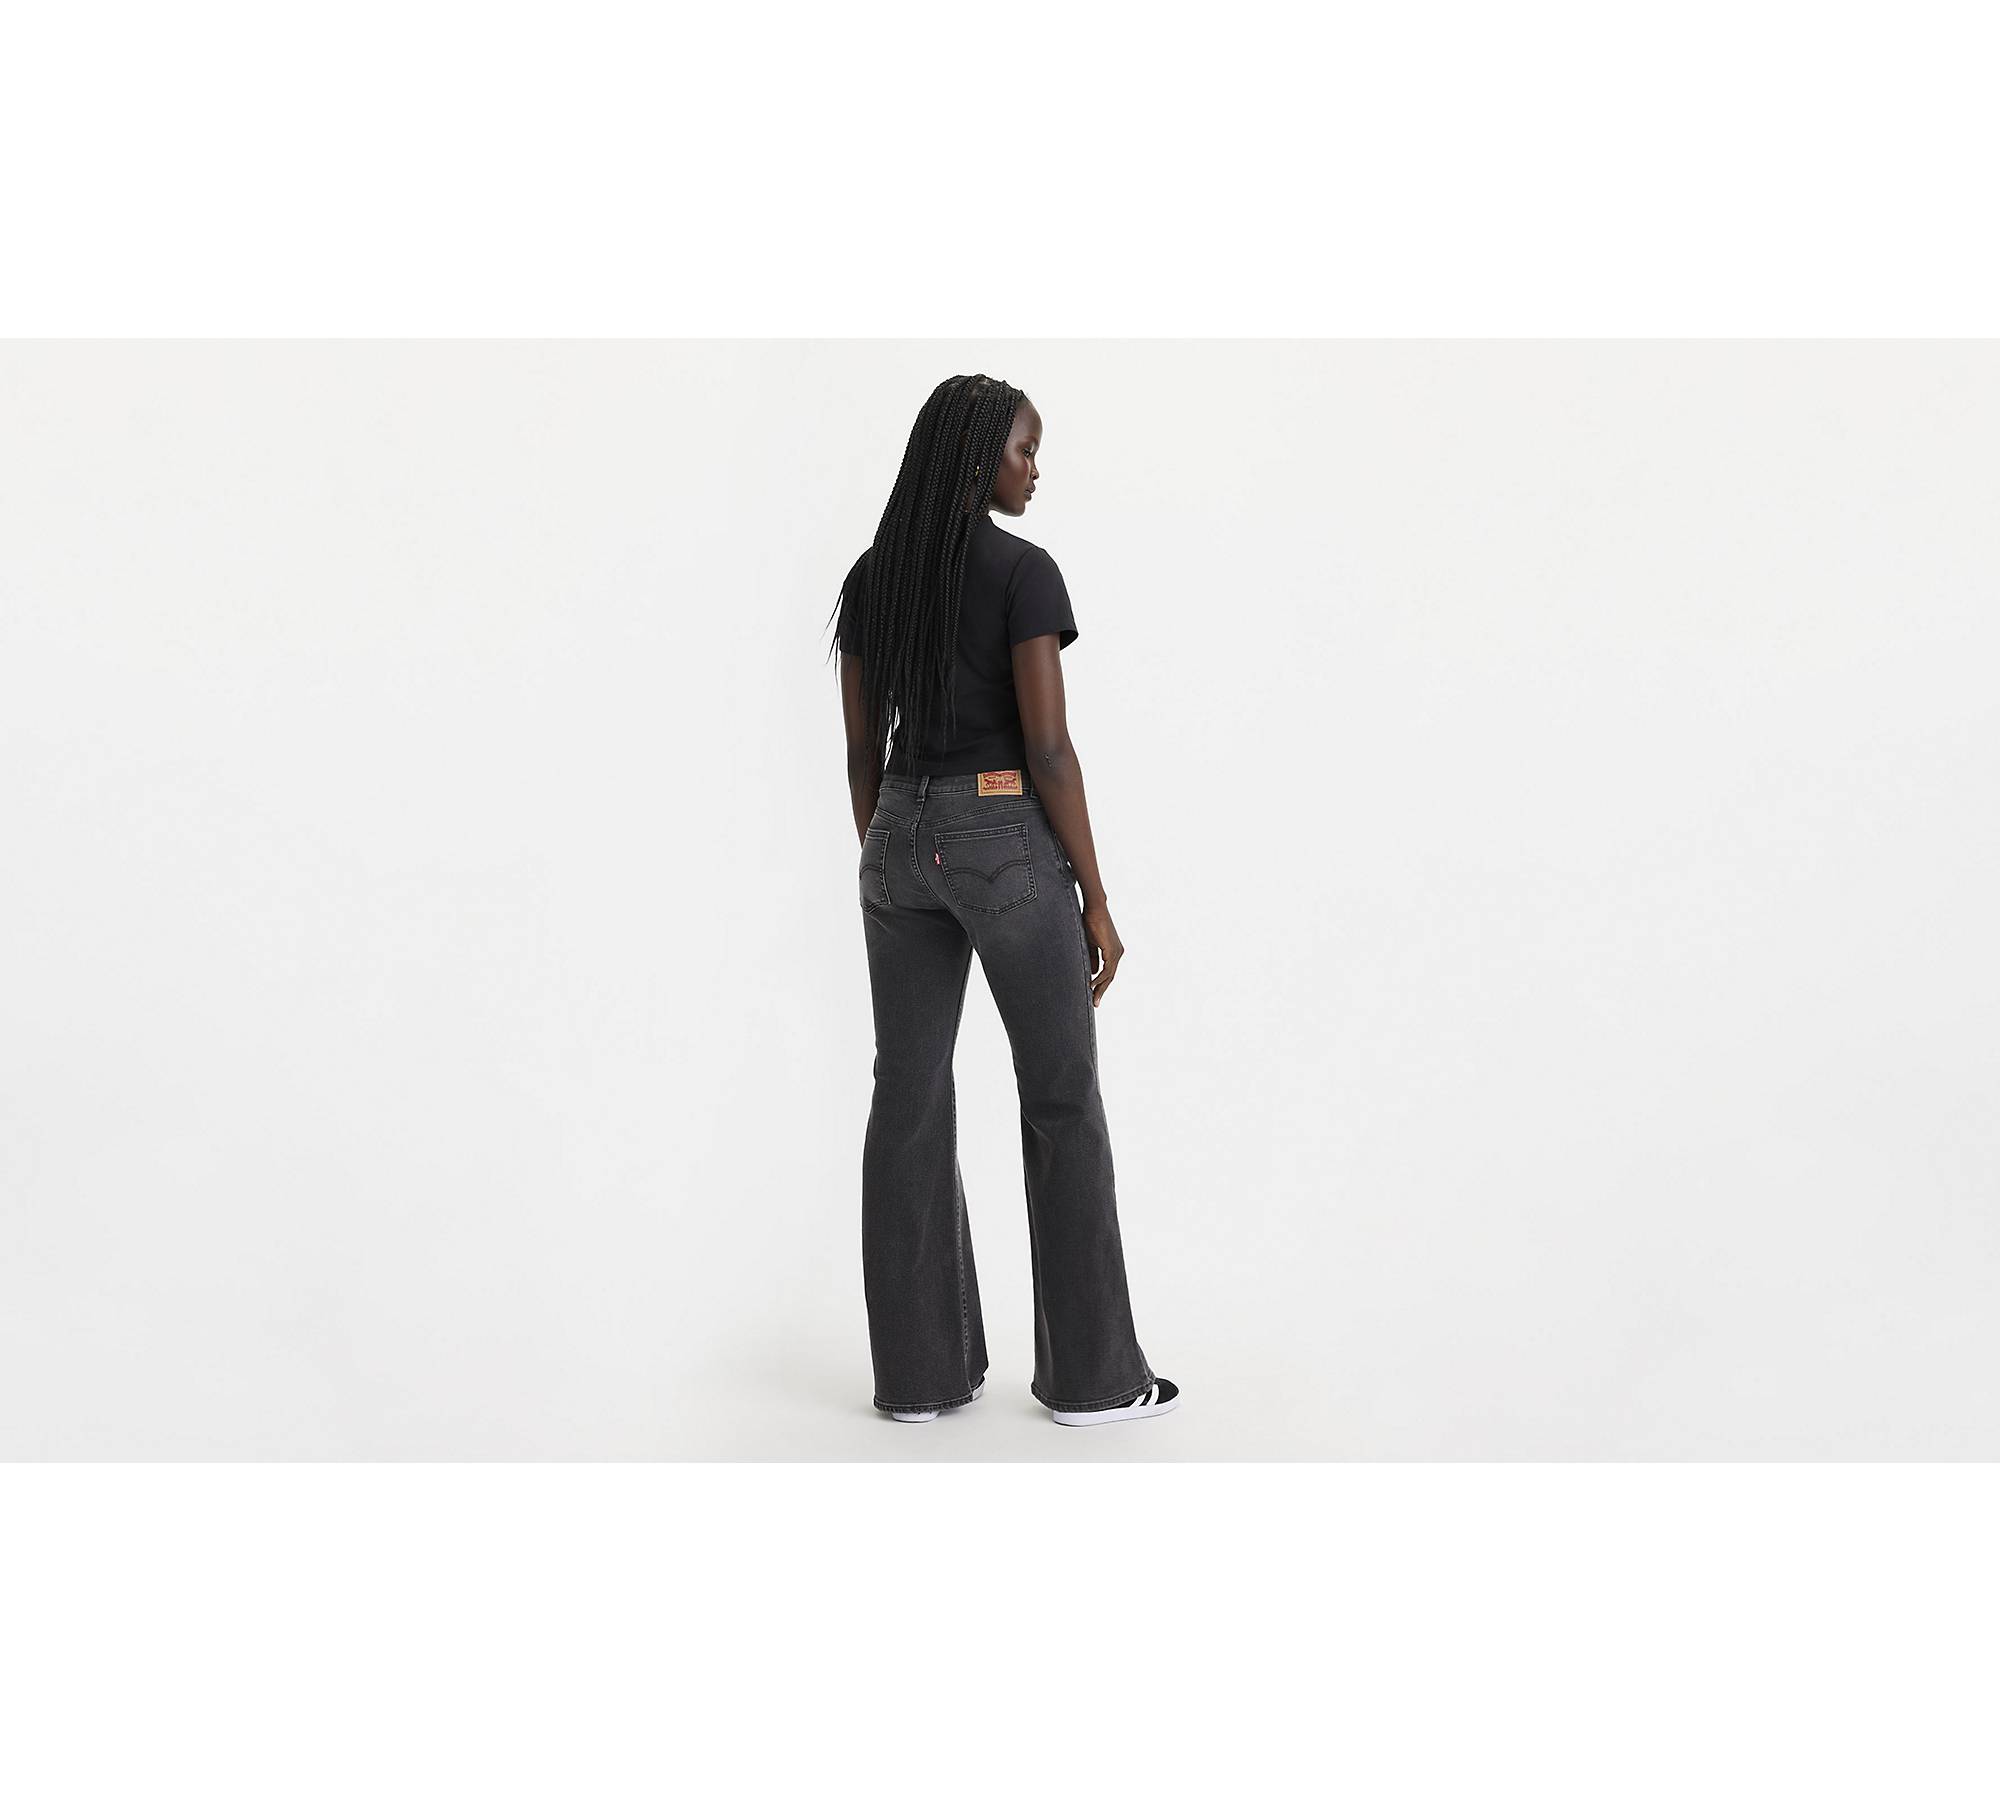 33 in. Athletica Fit Flare Bootcut Pants